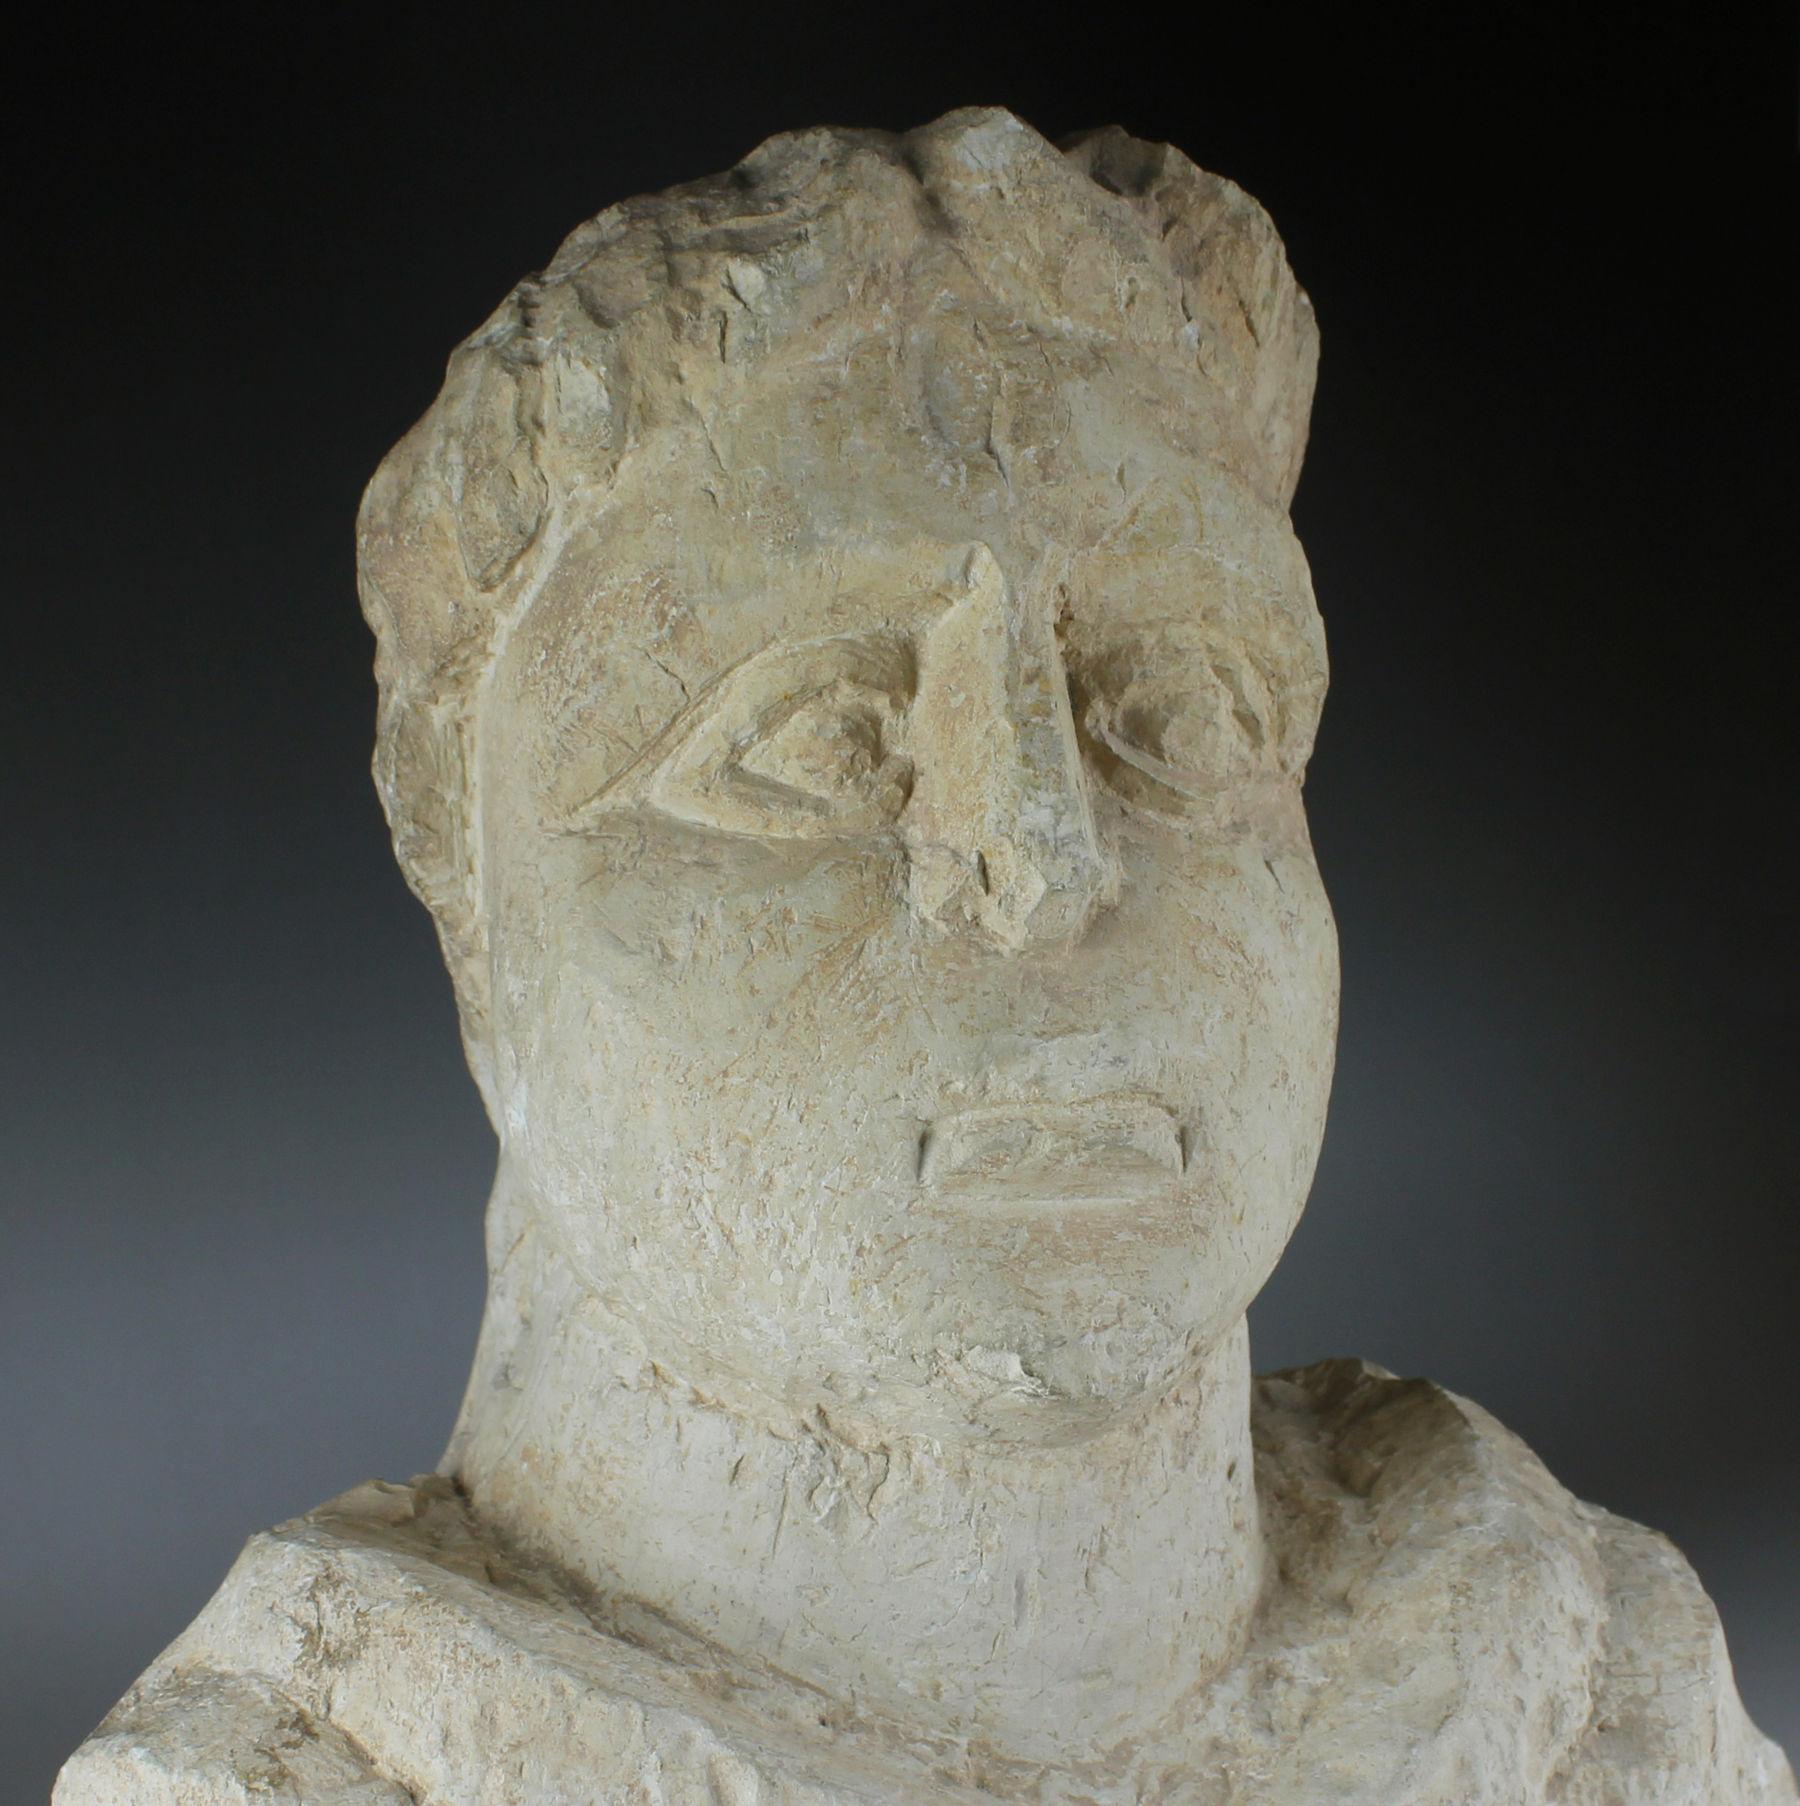 ITEM: Funerary bust of a man
MATERIAL: Limestone
CULTURE: Roman, Beth-Shean / Sebaste
PERIOD: 3rd Century A.D
DIMENSIONS: 325 mm x 280 mm x 153 mm
CONDITION: Good condition
PROVENANCE: Ex American private collection, David Hendin. Ex Shraga